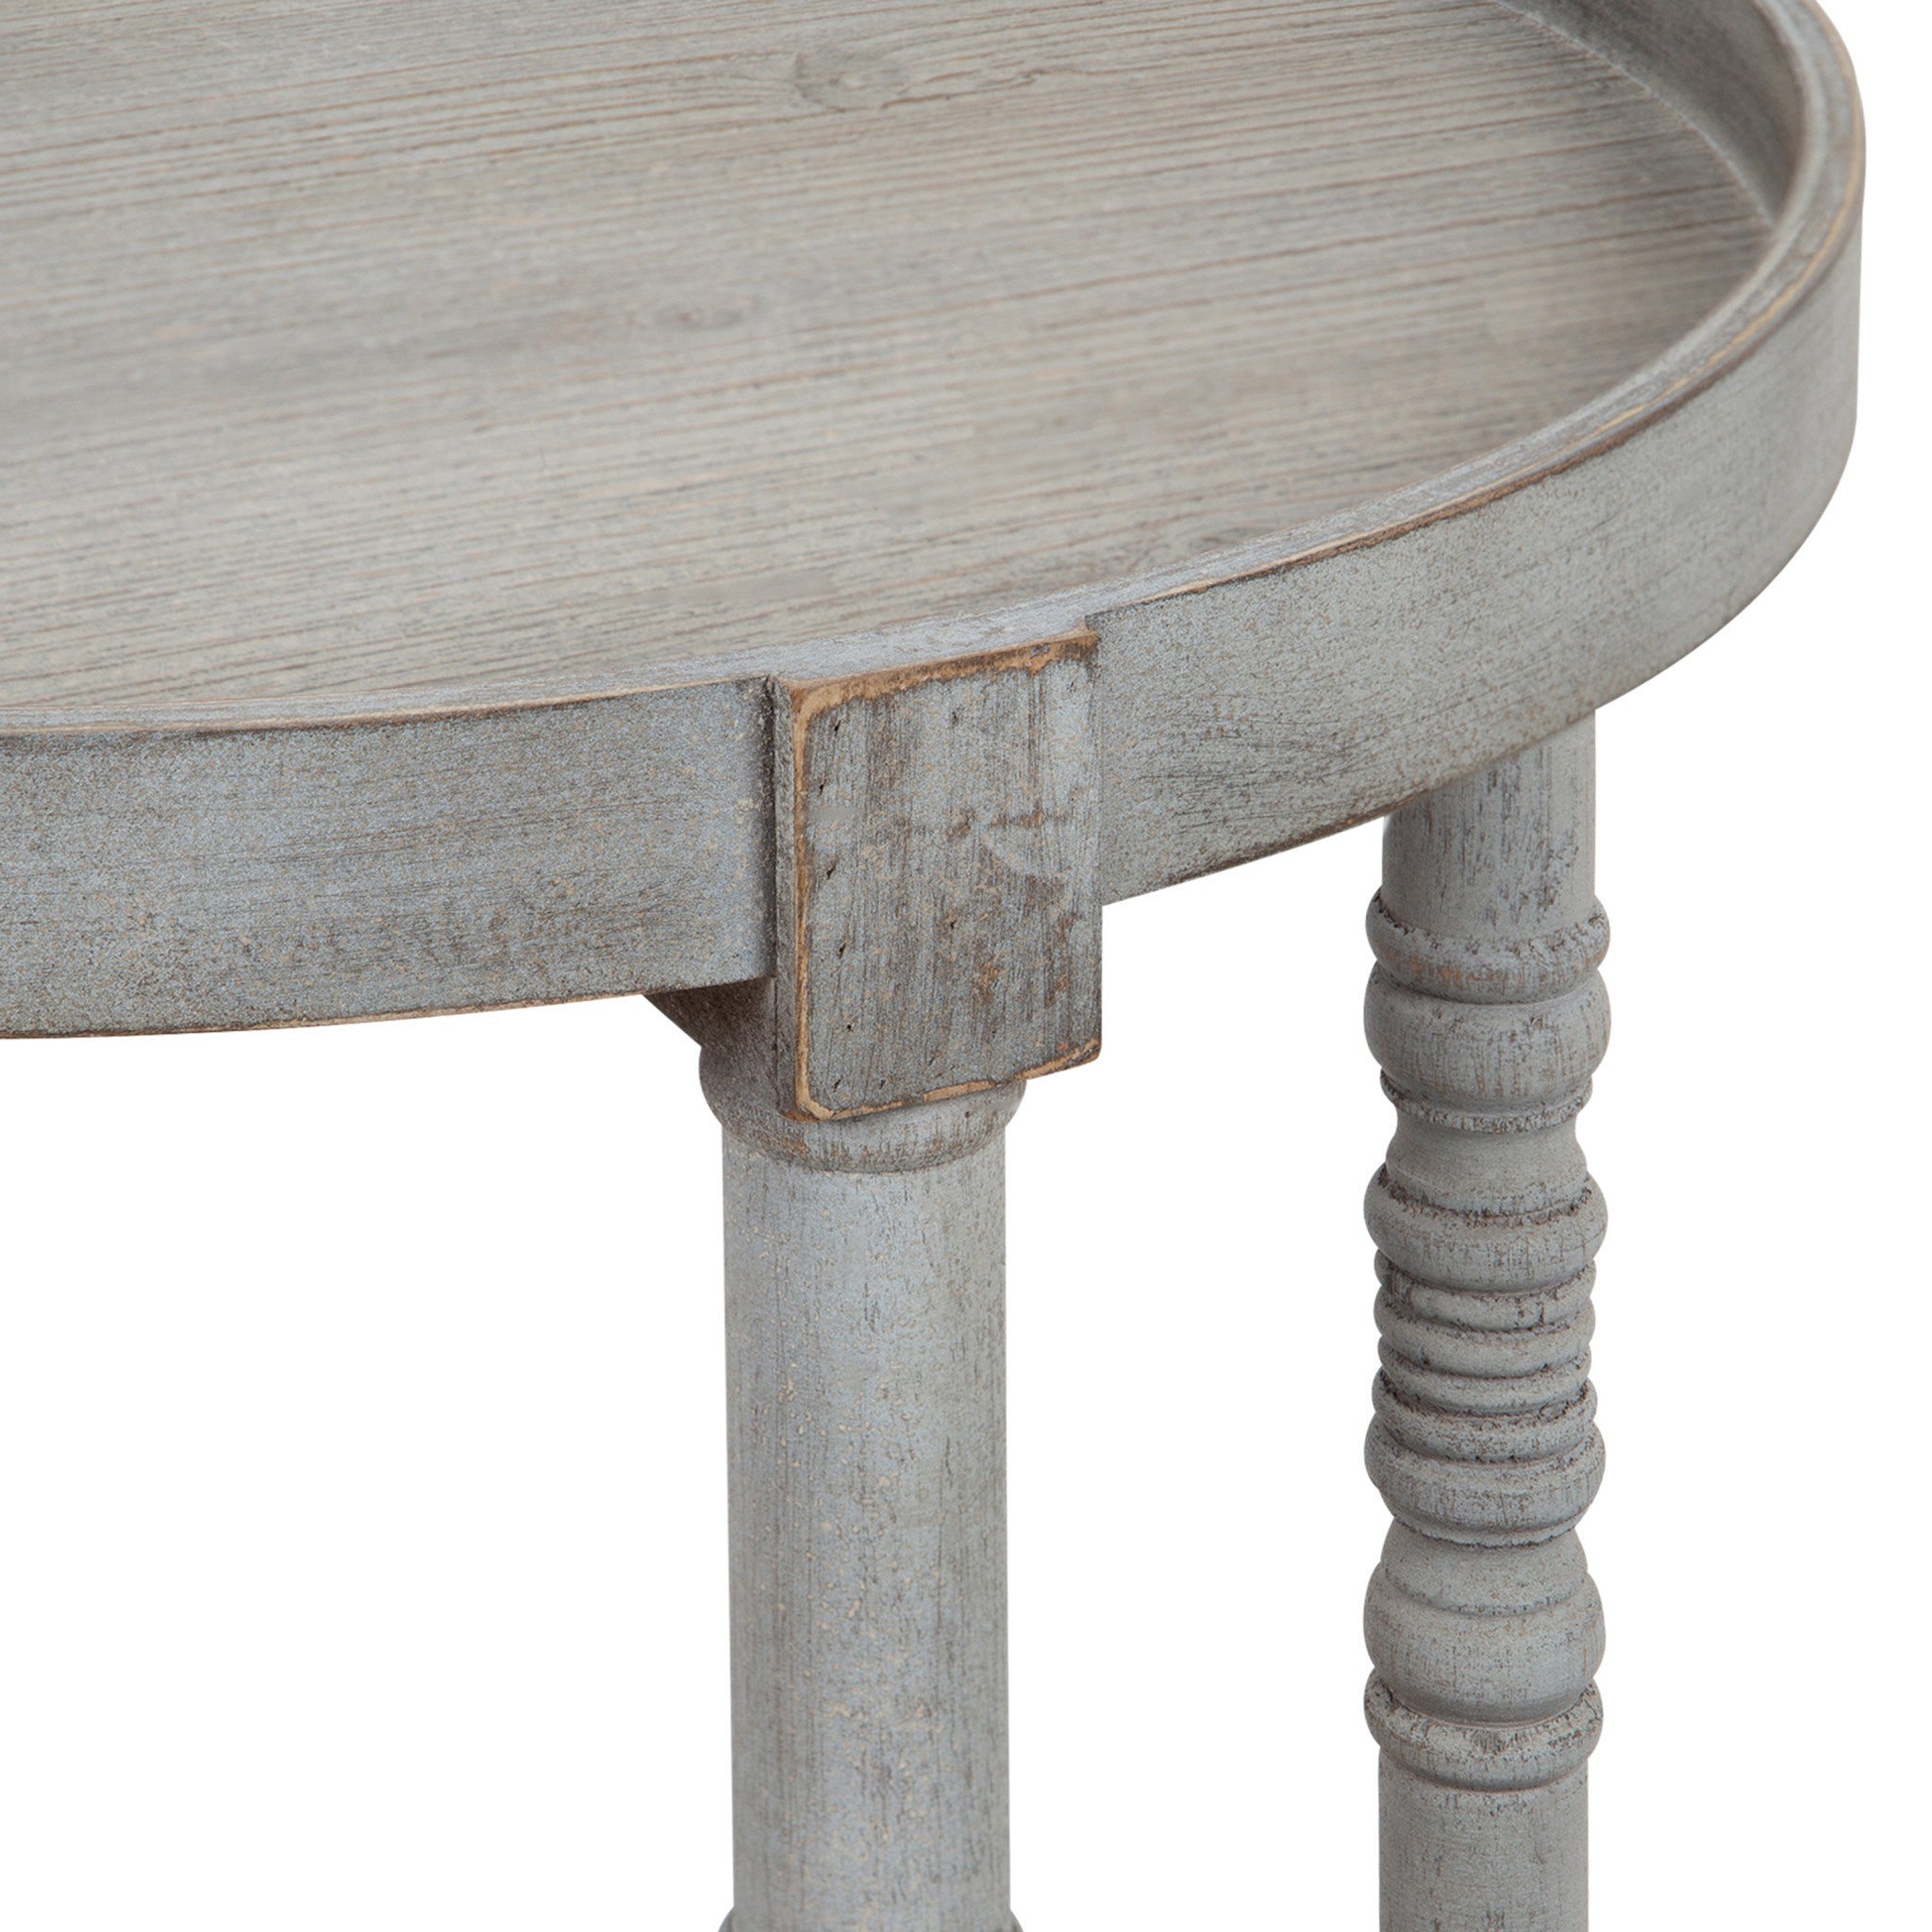 Bellport Round Wood Side Table with Shelf